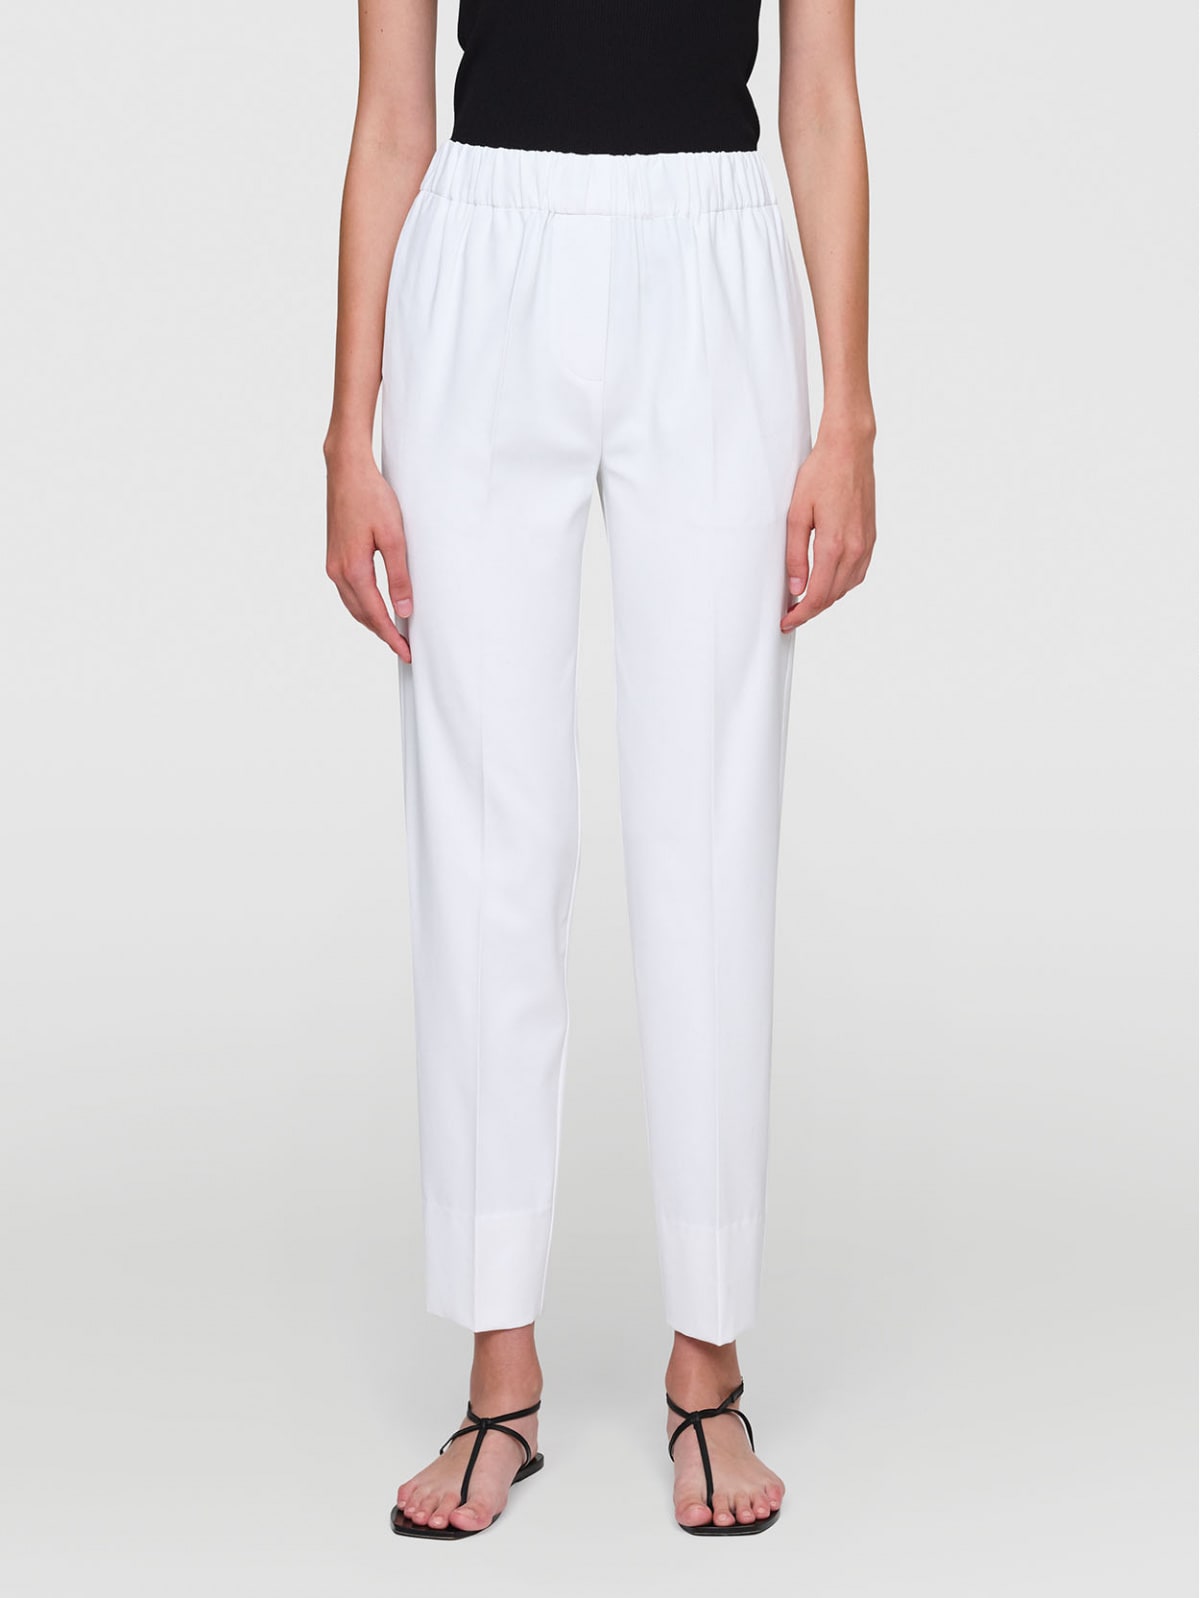 IN GOOD COMPANY - MARVIN Summer Suiting Pants White XS